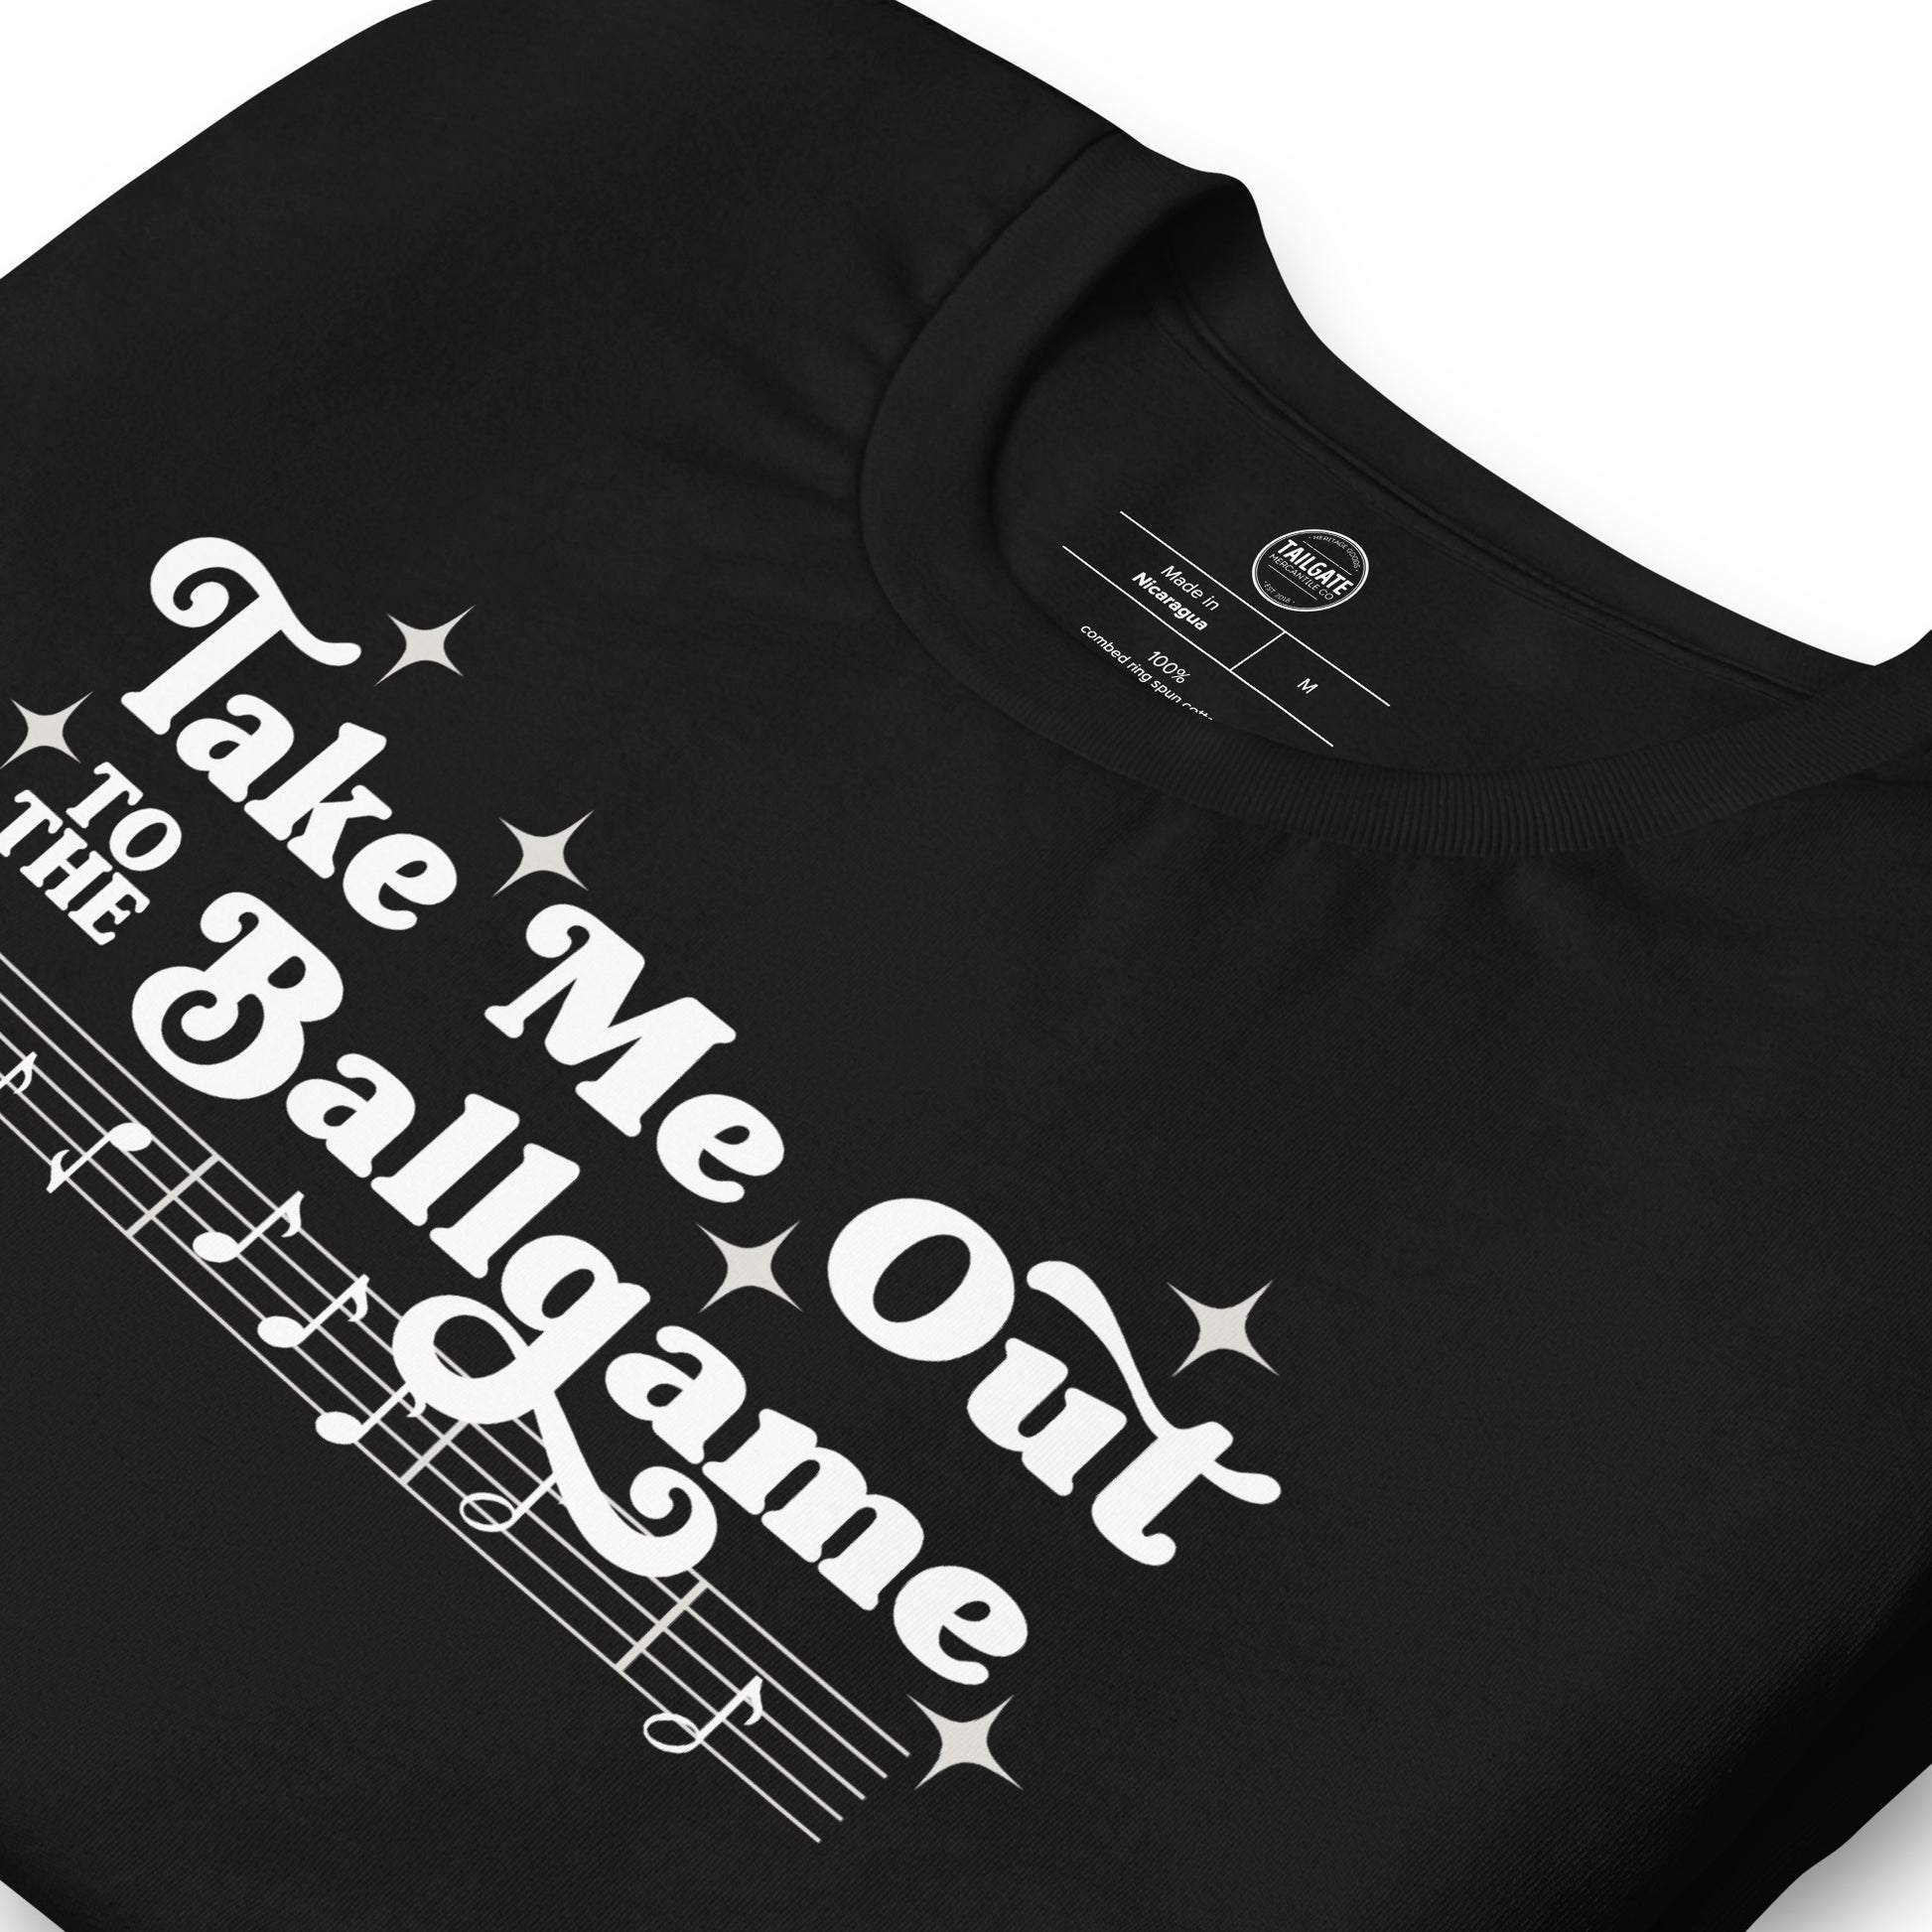 Close up image of black t-shirt with design of "Take Me Out to the Ballgame" with coordinating musical notes in white located on centre chest. This design is exclusive to Tailgate Mercantile and available only online.